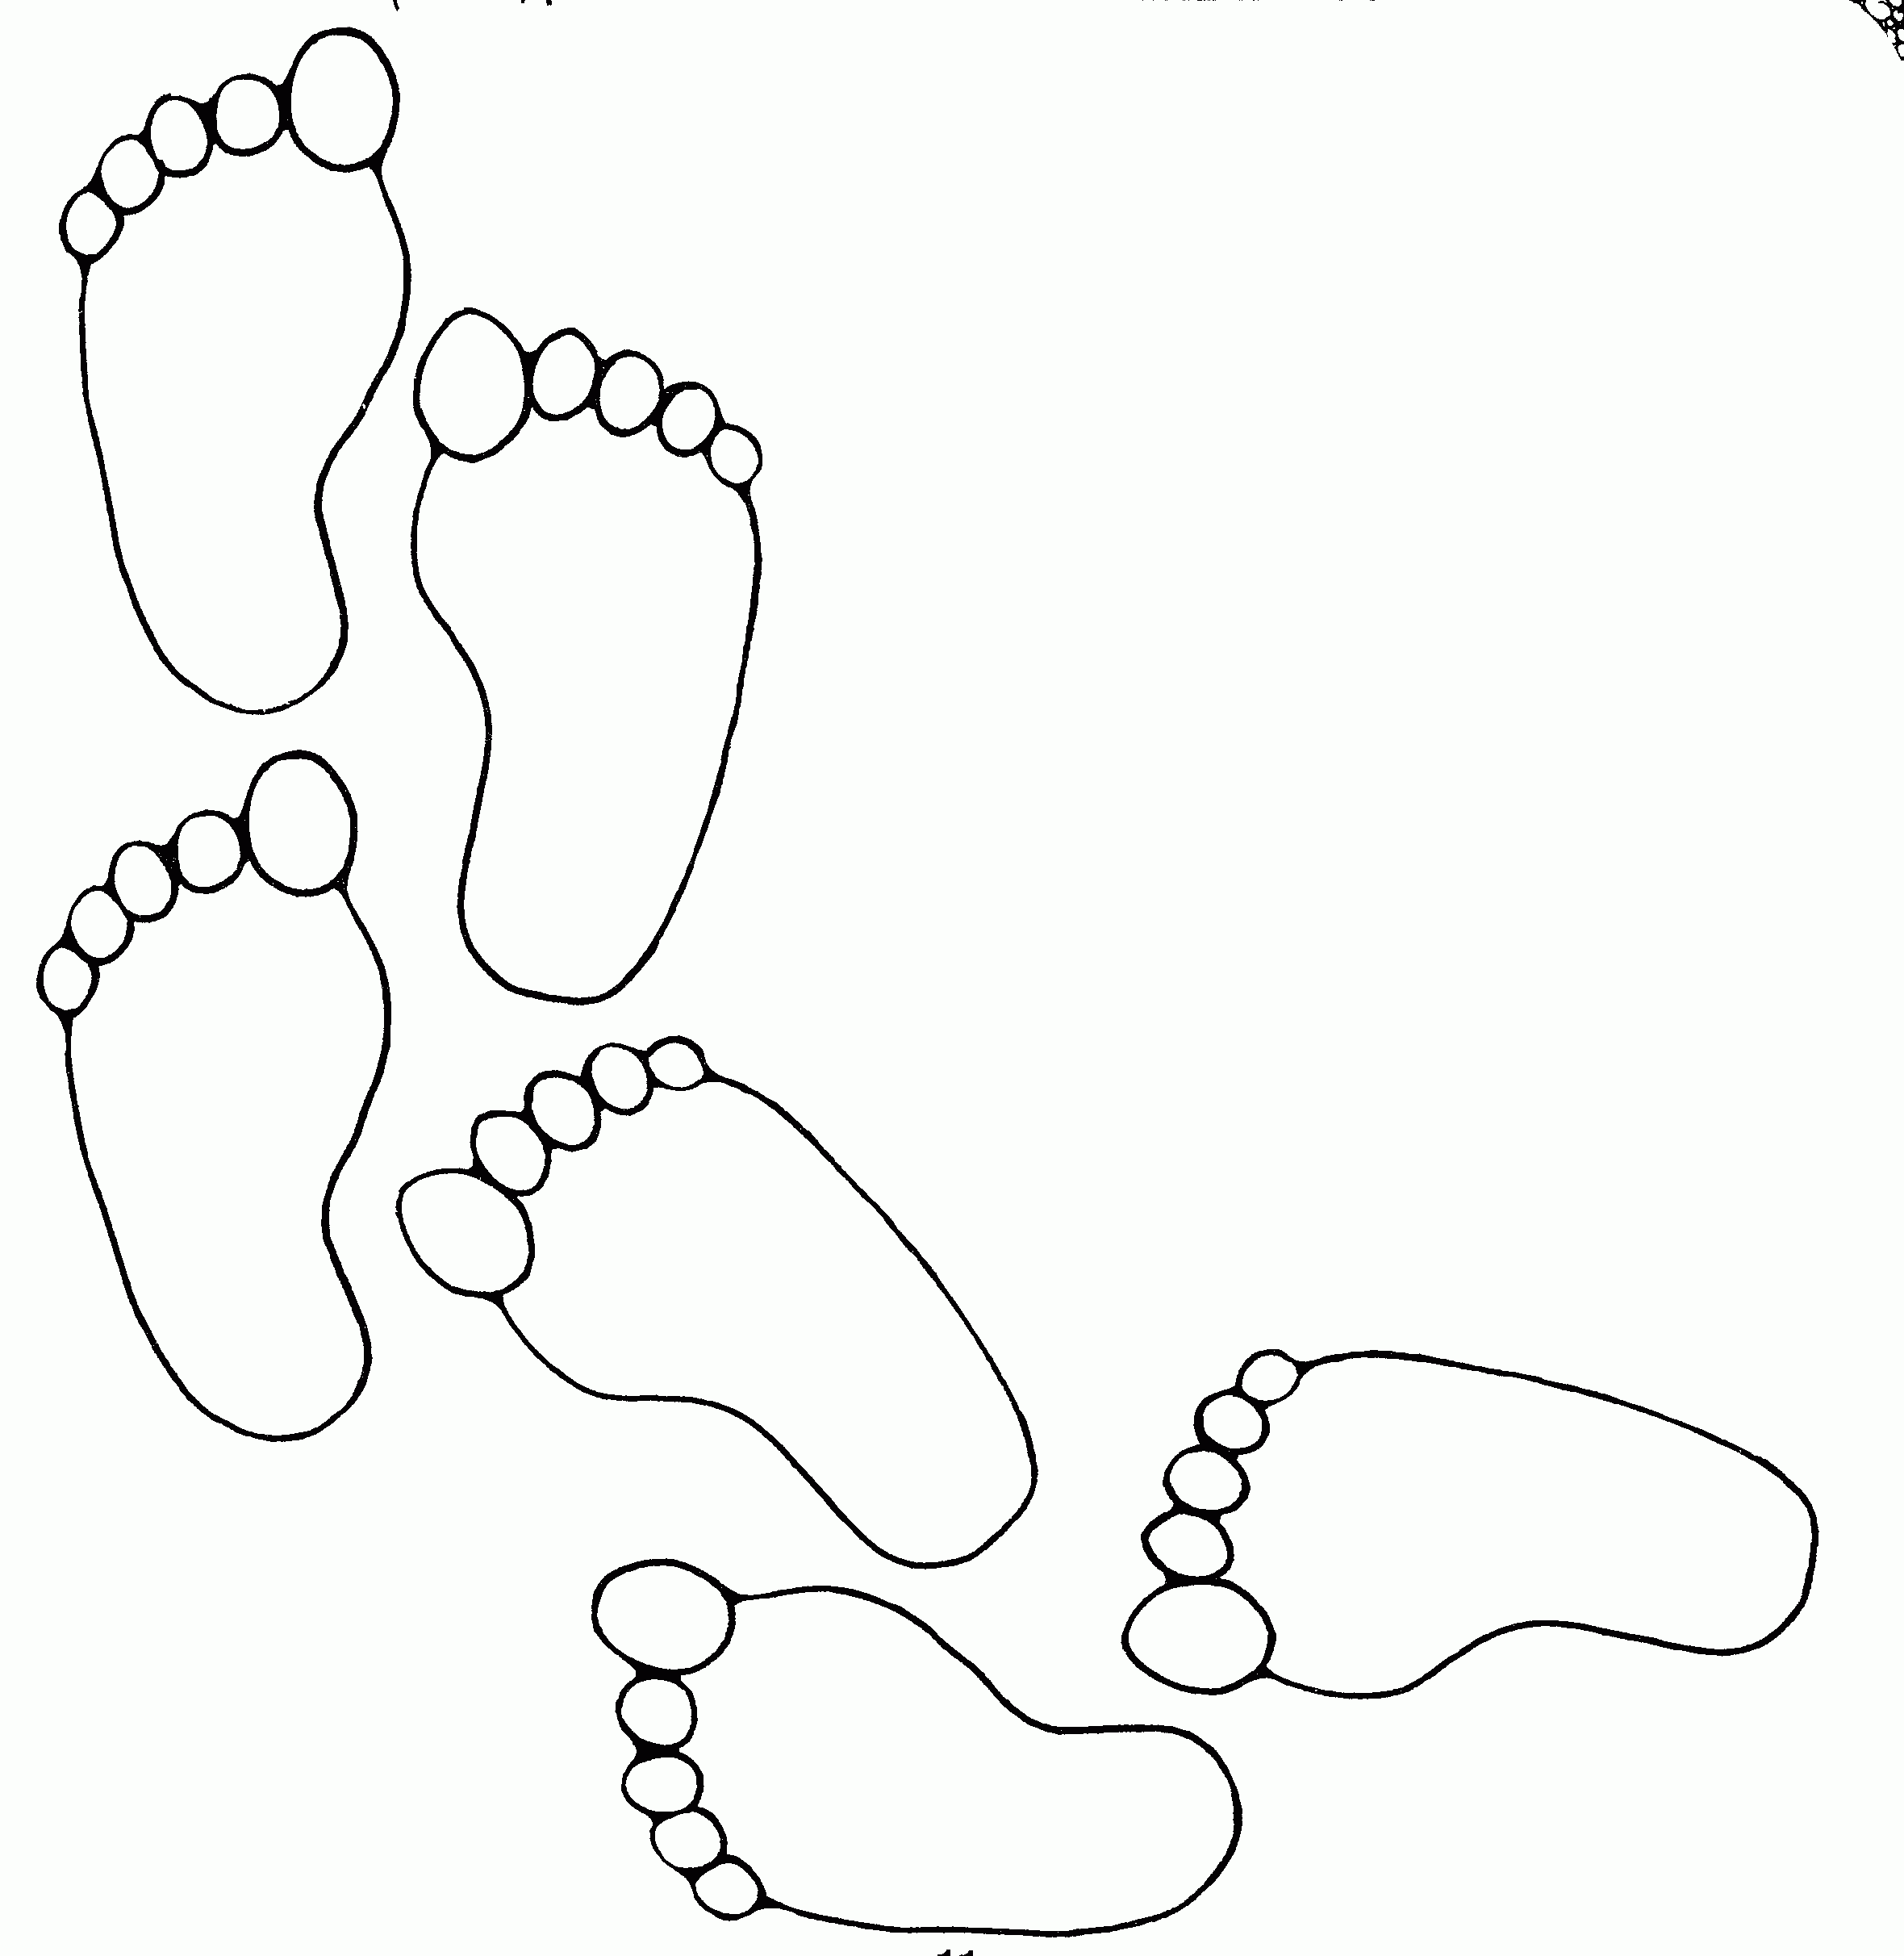 Step into Creativity with Our Collection of Foot Coloring Pages